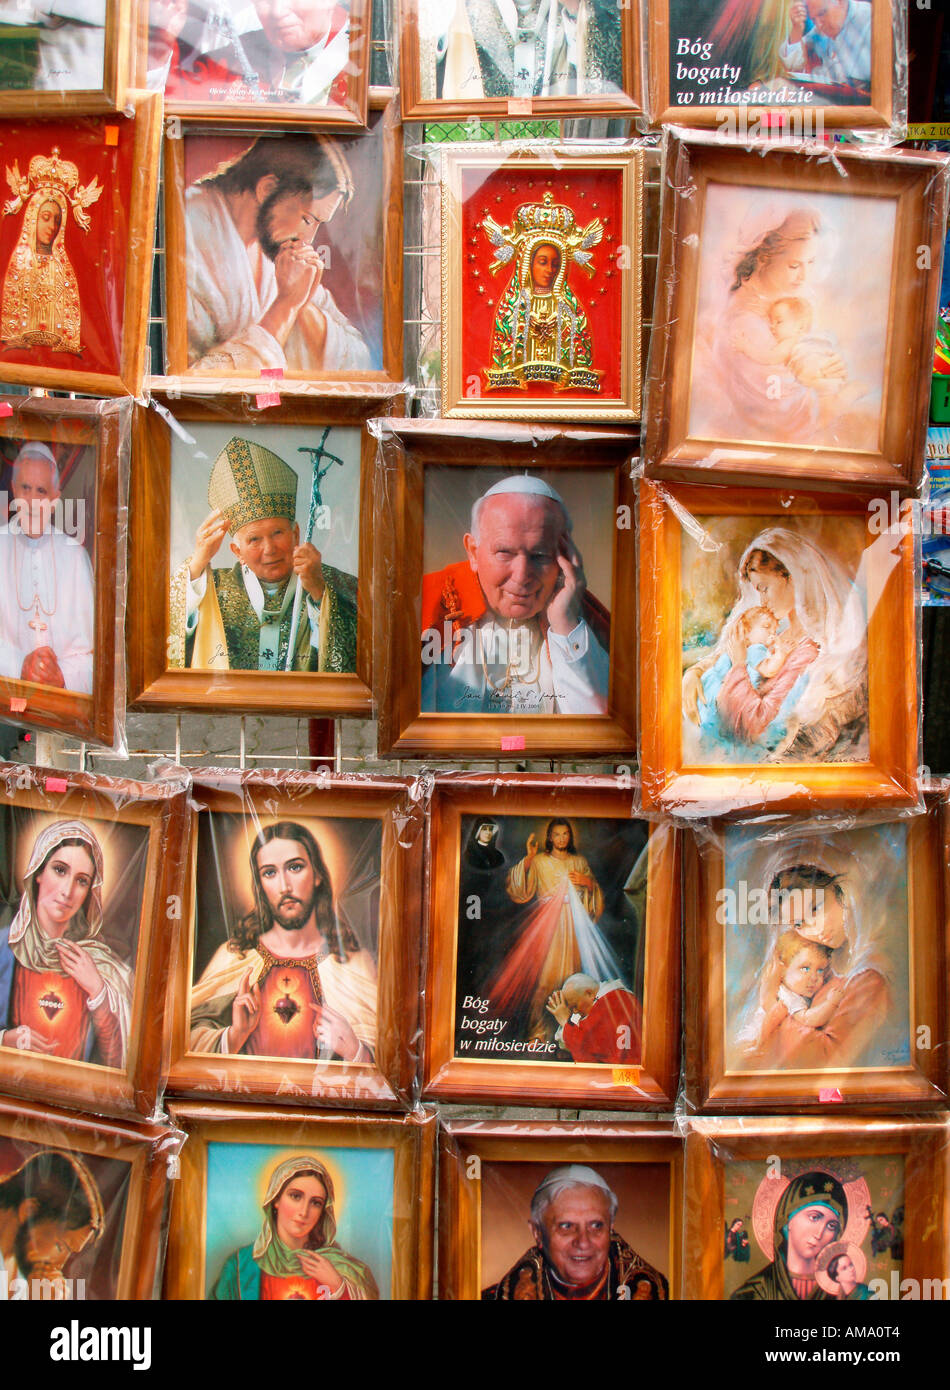 Popes and religious images for sell Lichen Poland Stock Photo